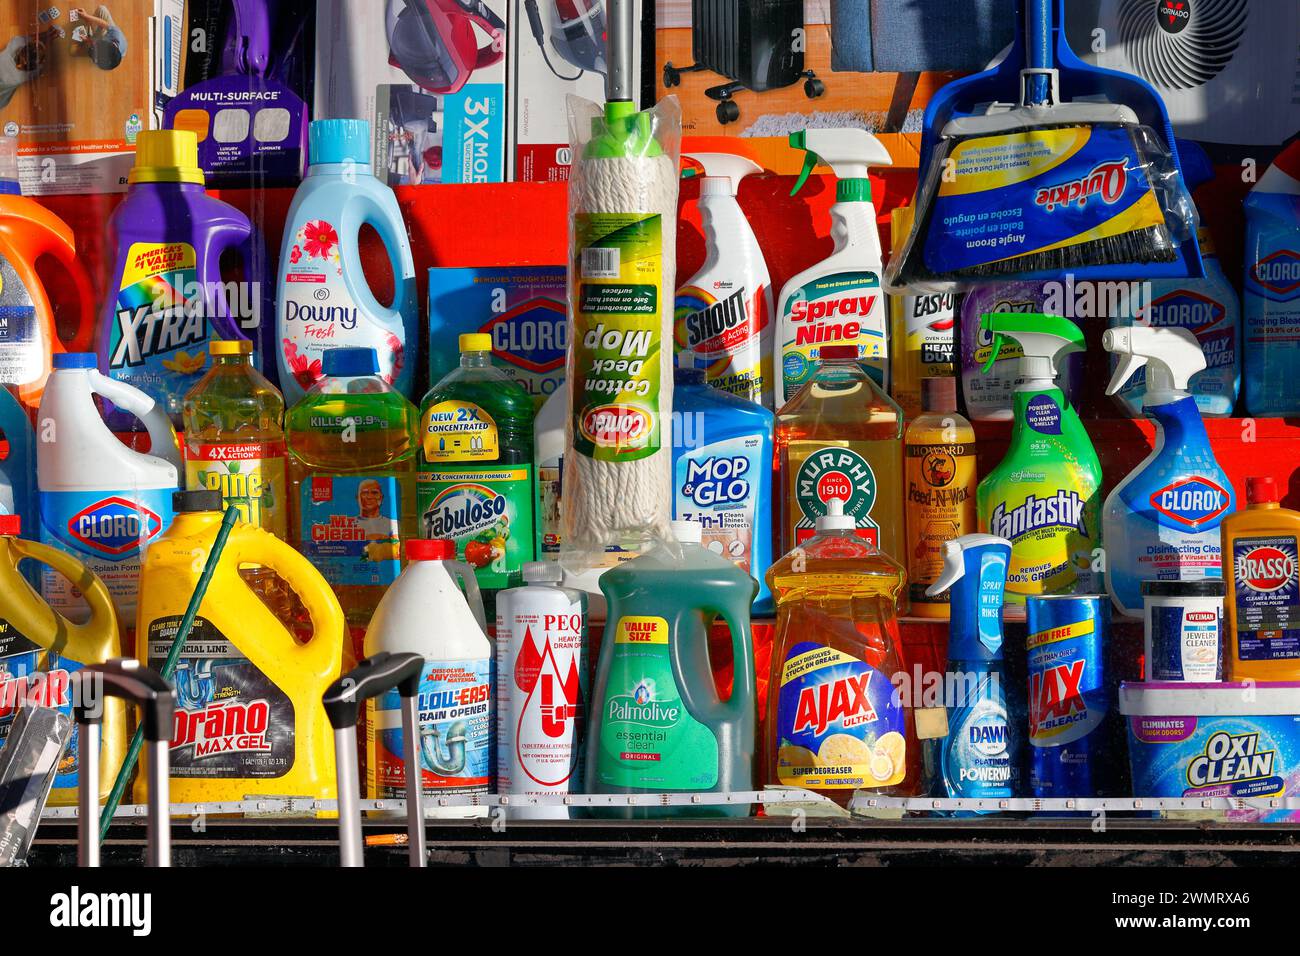 A store window display of American household cleaning products, soaps and detergents. Stock Photo